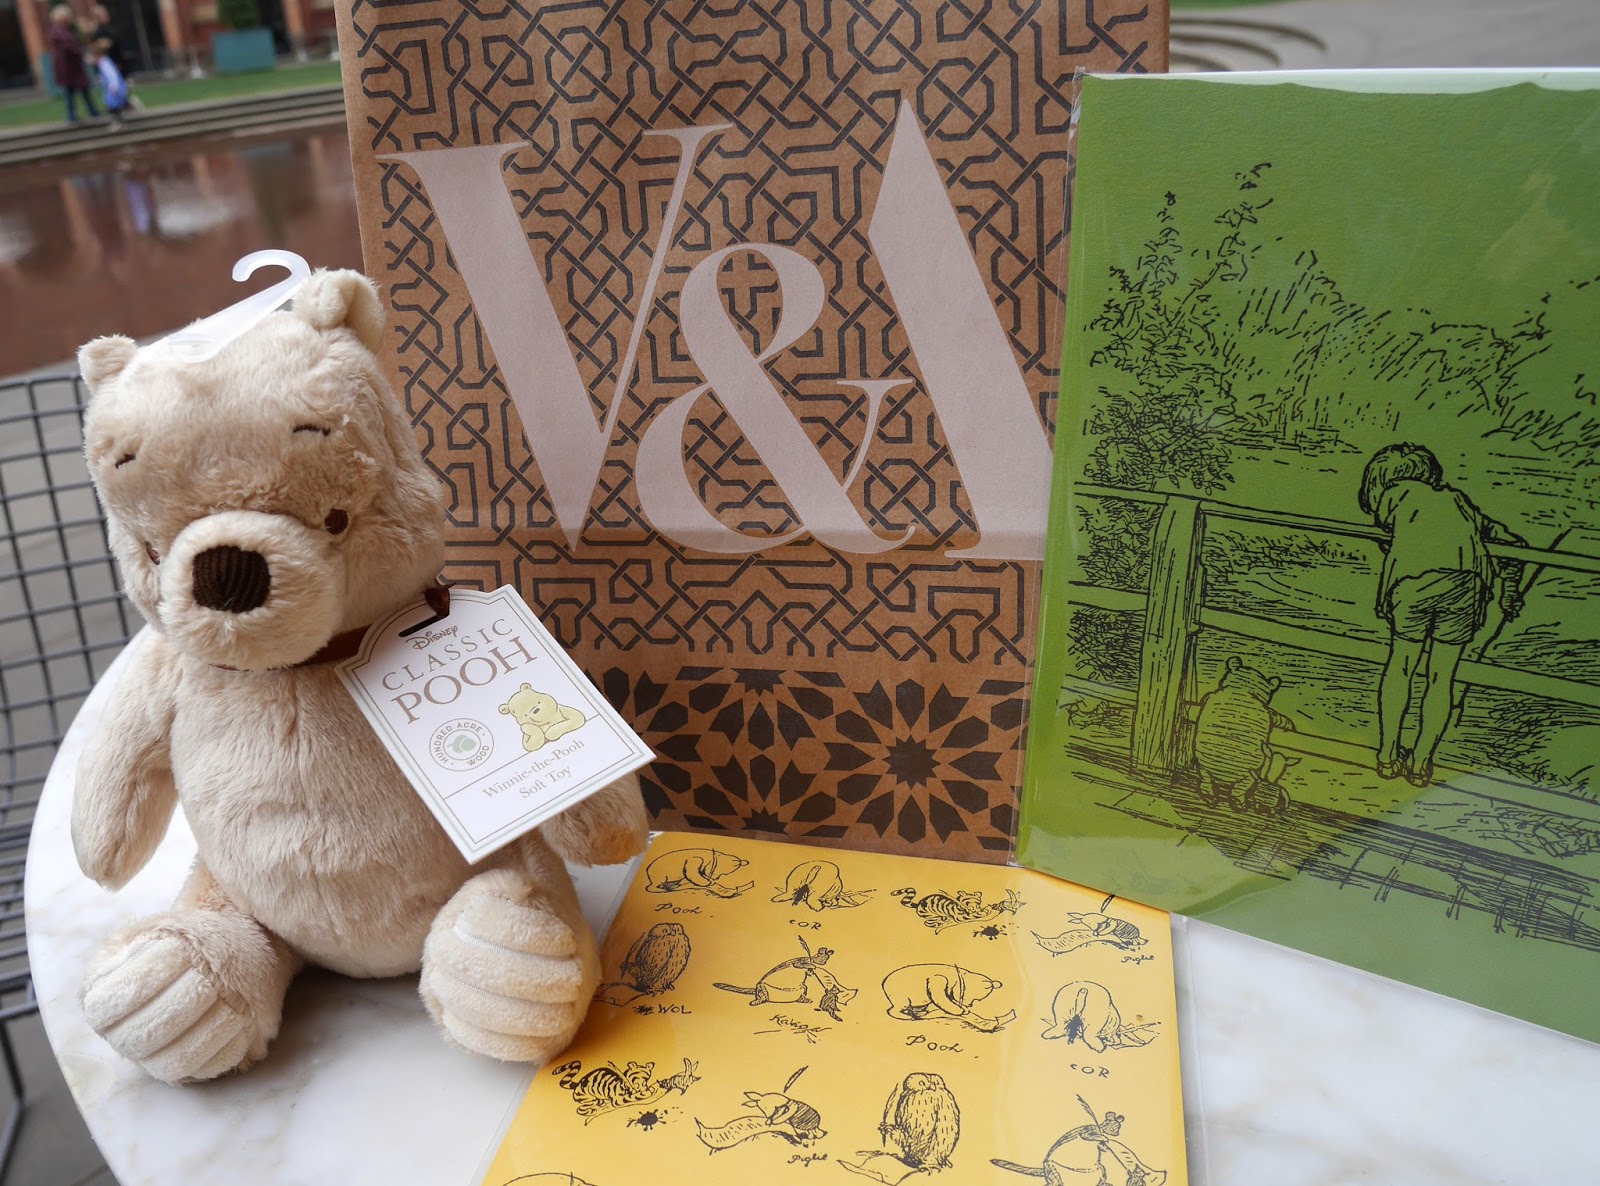 My souvenirs from the Winnie the Pooh: Exploring a Classic exhibition at the Victoria and Albert Museum, London